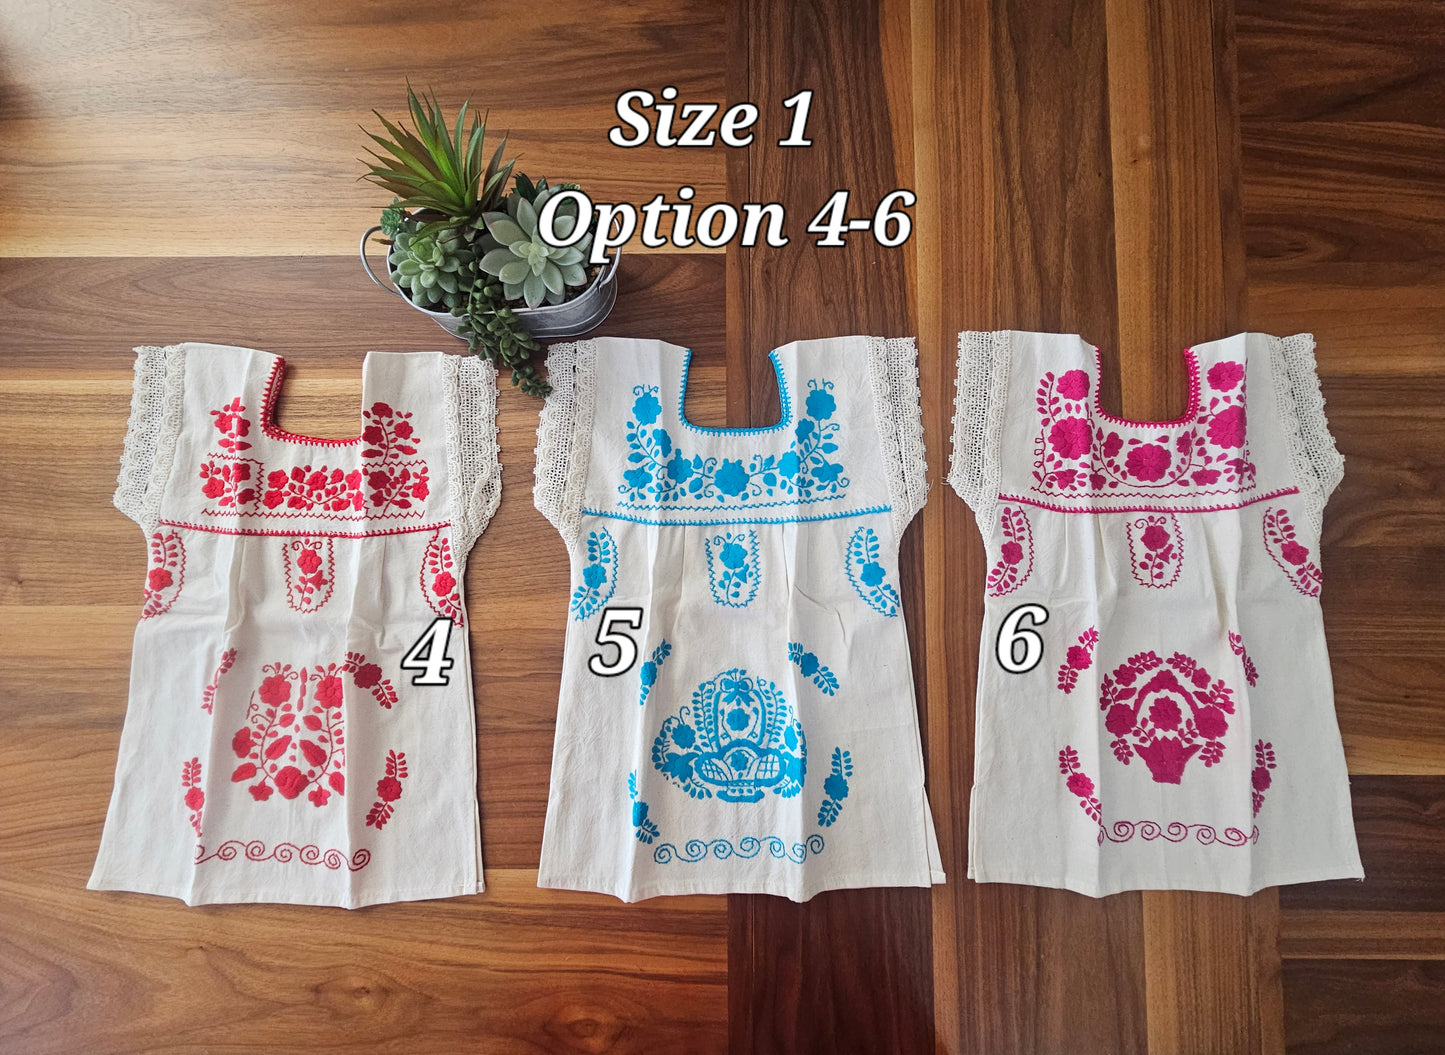 Cute Girls Mexican Hand Embroider Dresses Size 0 - 6  @amorfashionshop